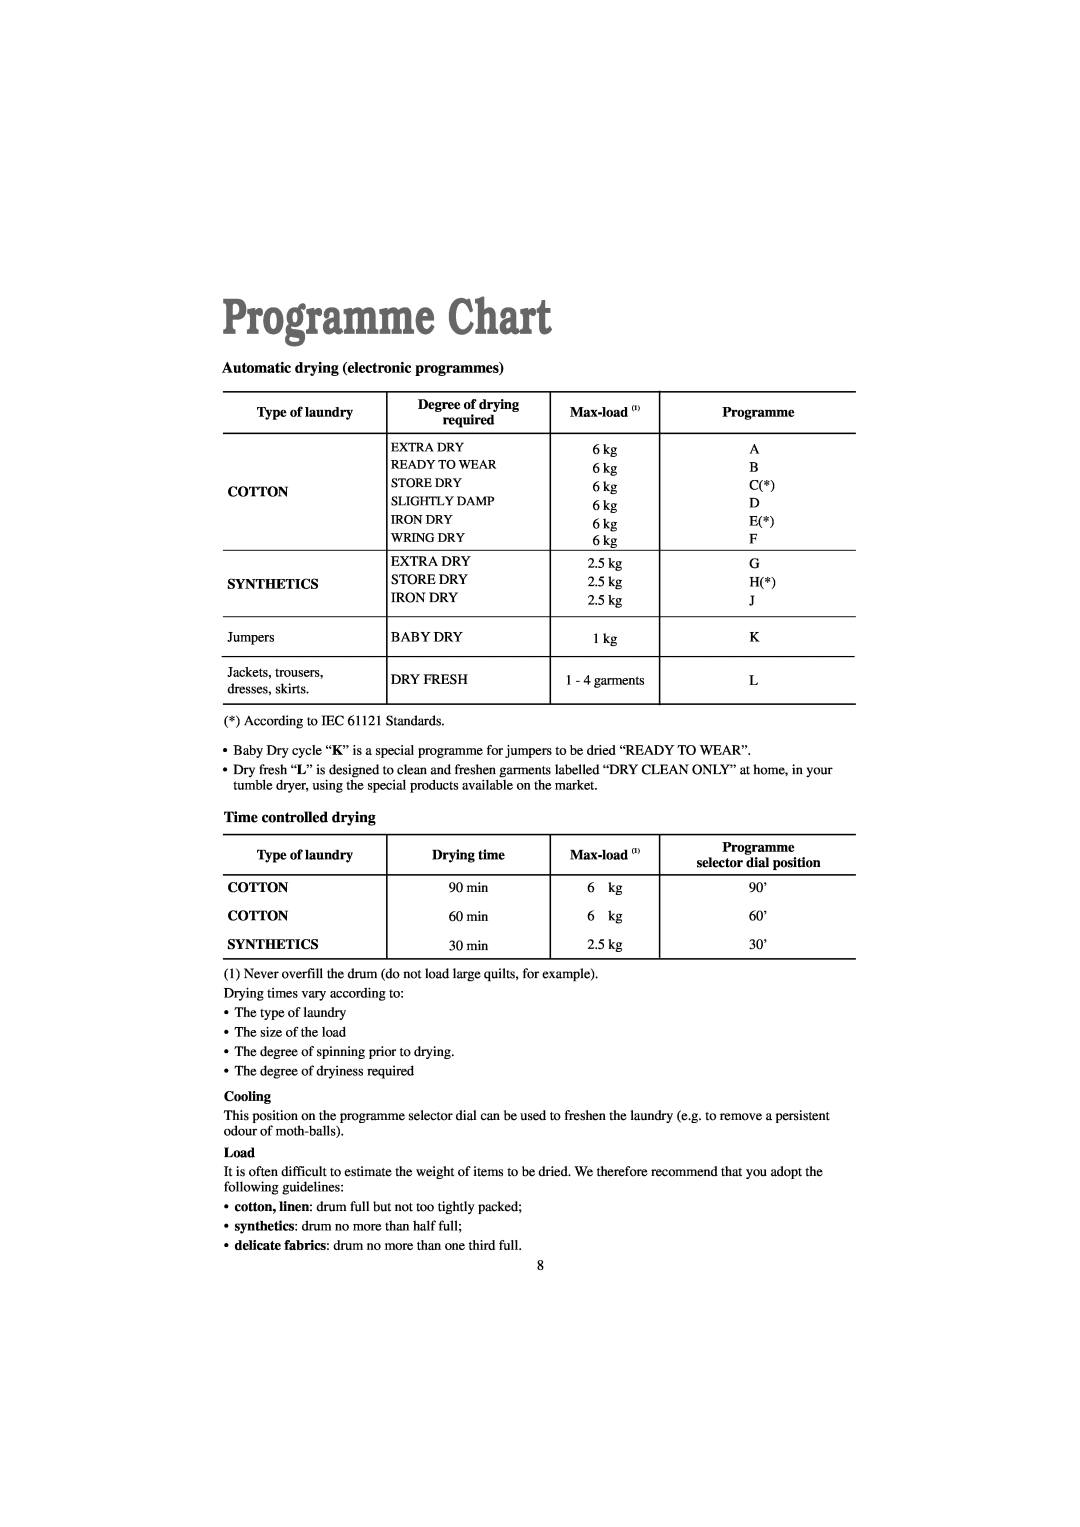 Zanussi TCE 7276 W Programme Chart, Automatic drying electronic programmes, Time controlled drying, Type of laundry, Load 